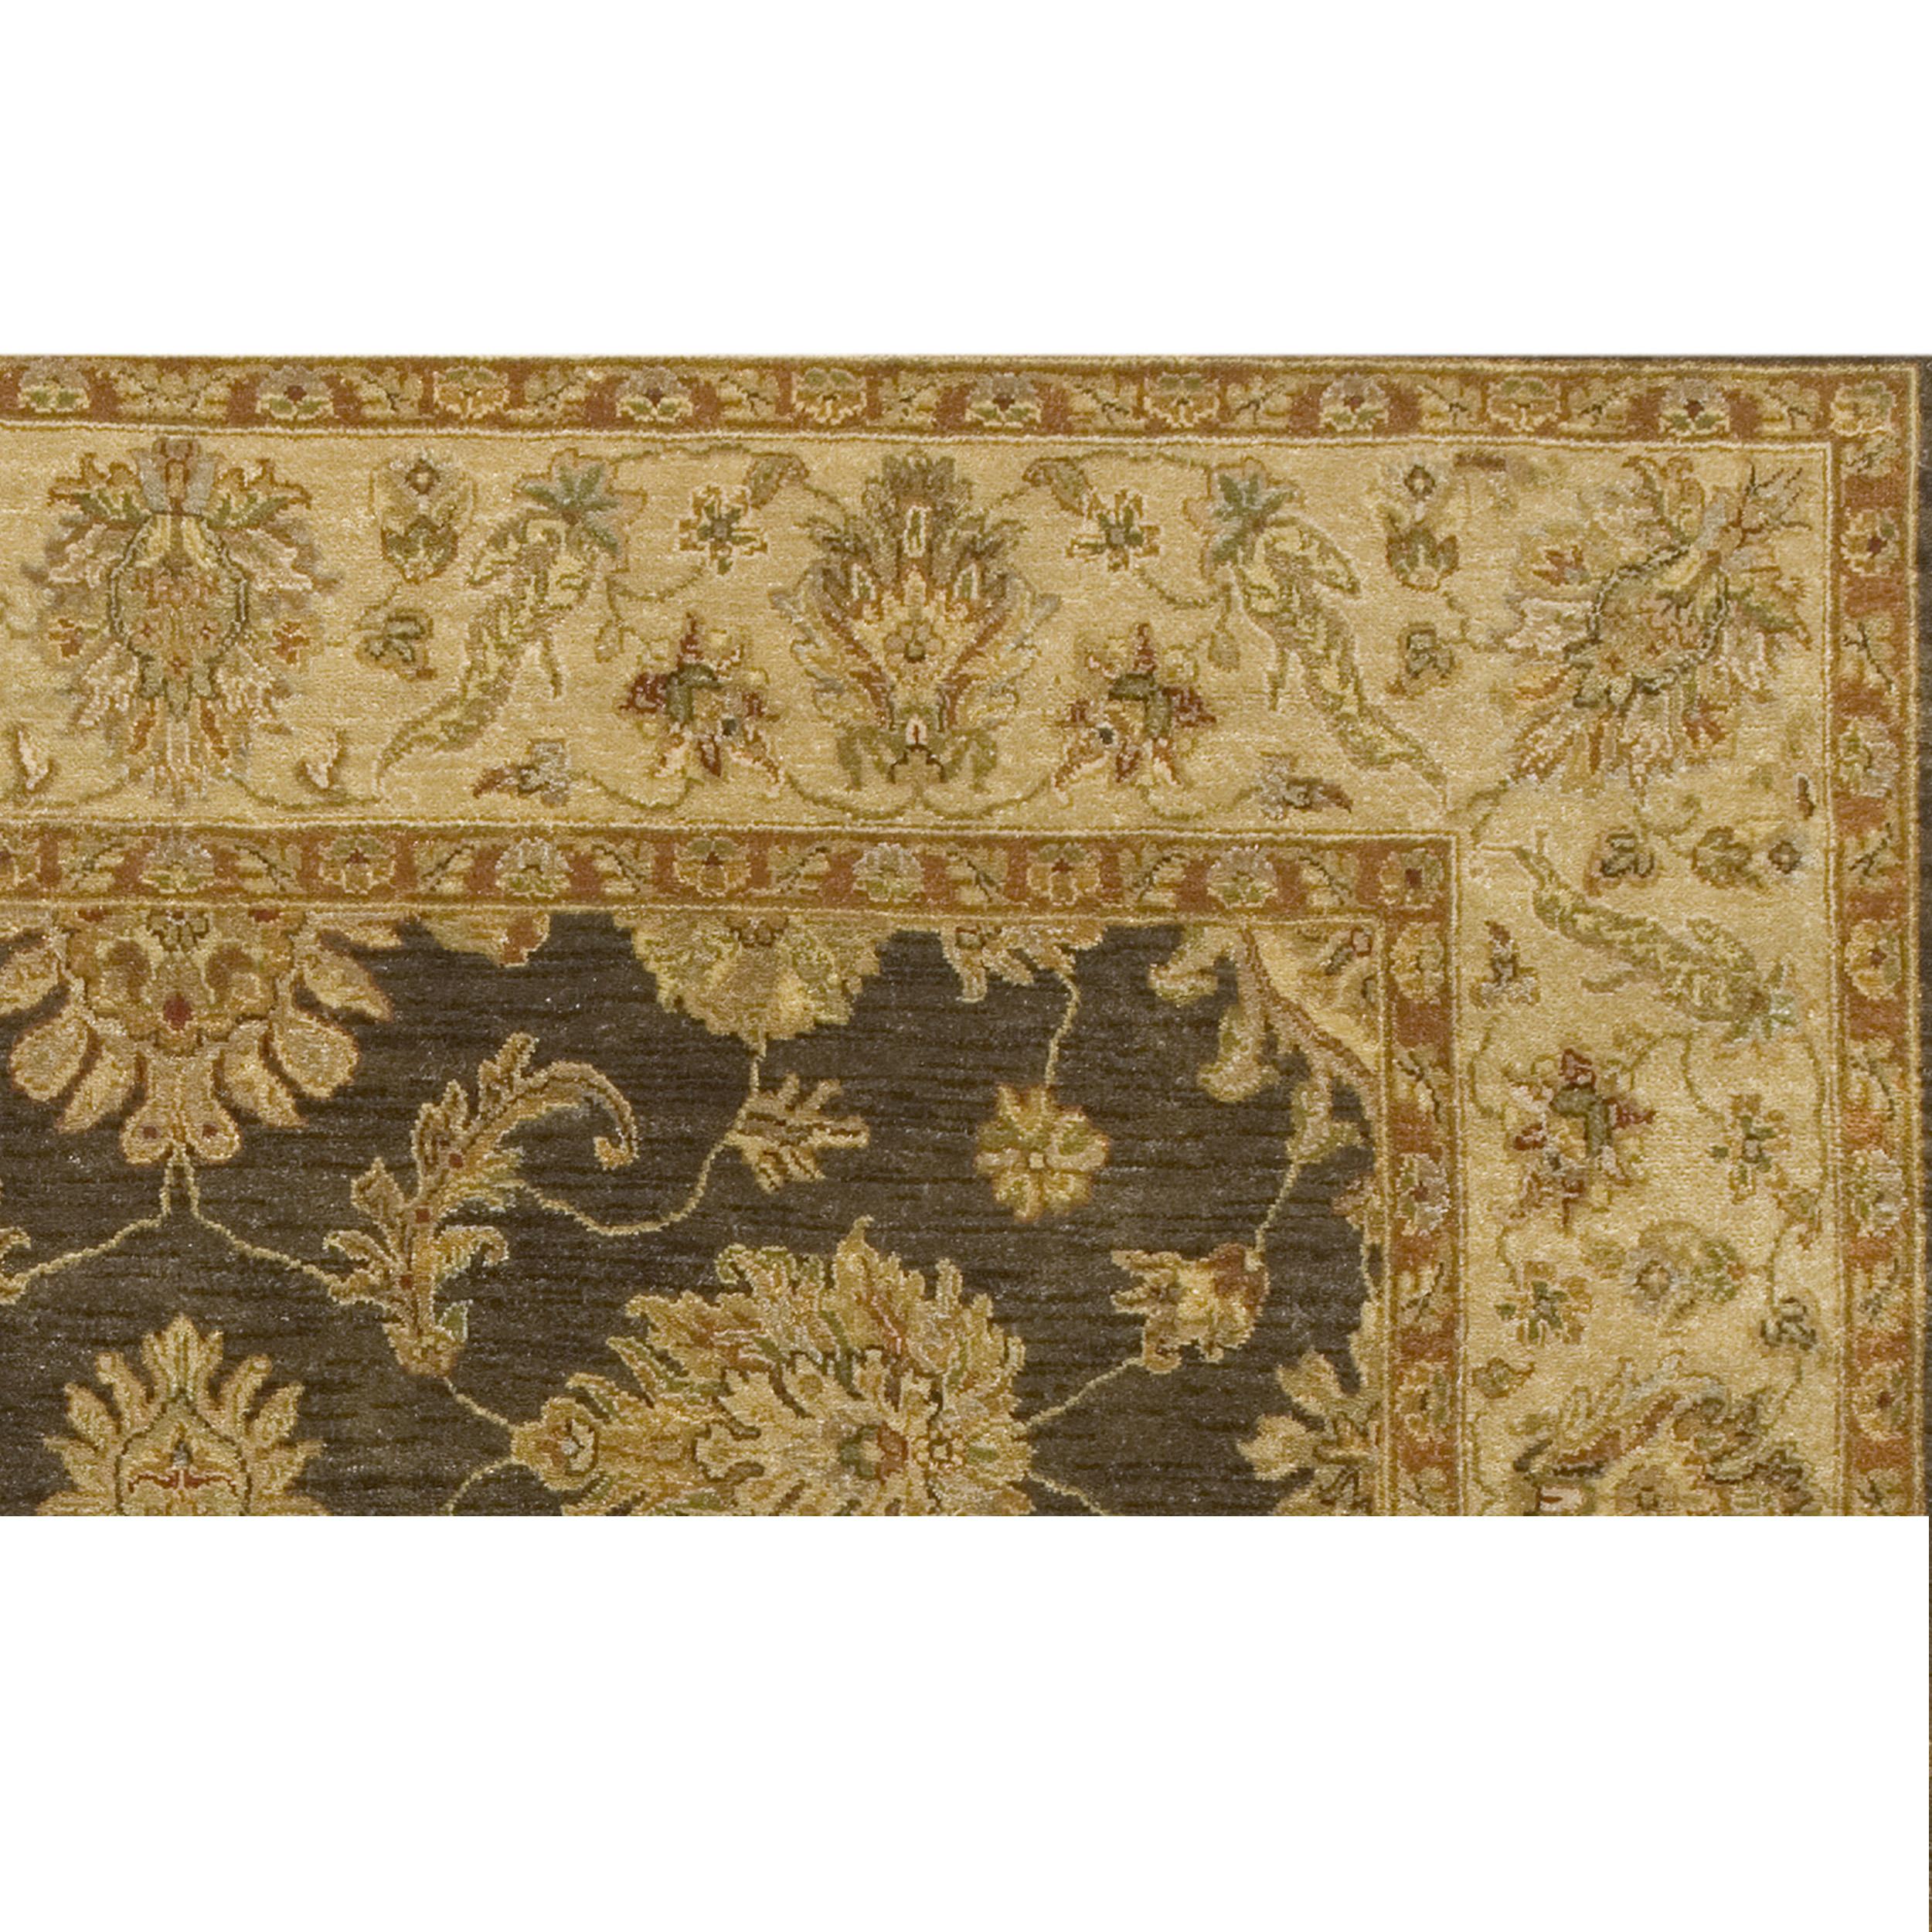 Luxury Traditional Hand-Knotted Amritsar Ziegler Brown/Beige 12x24 Rug In New Condition For Sale In Secaucus, NJ